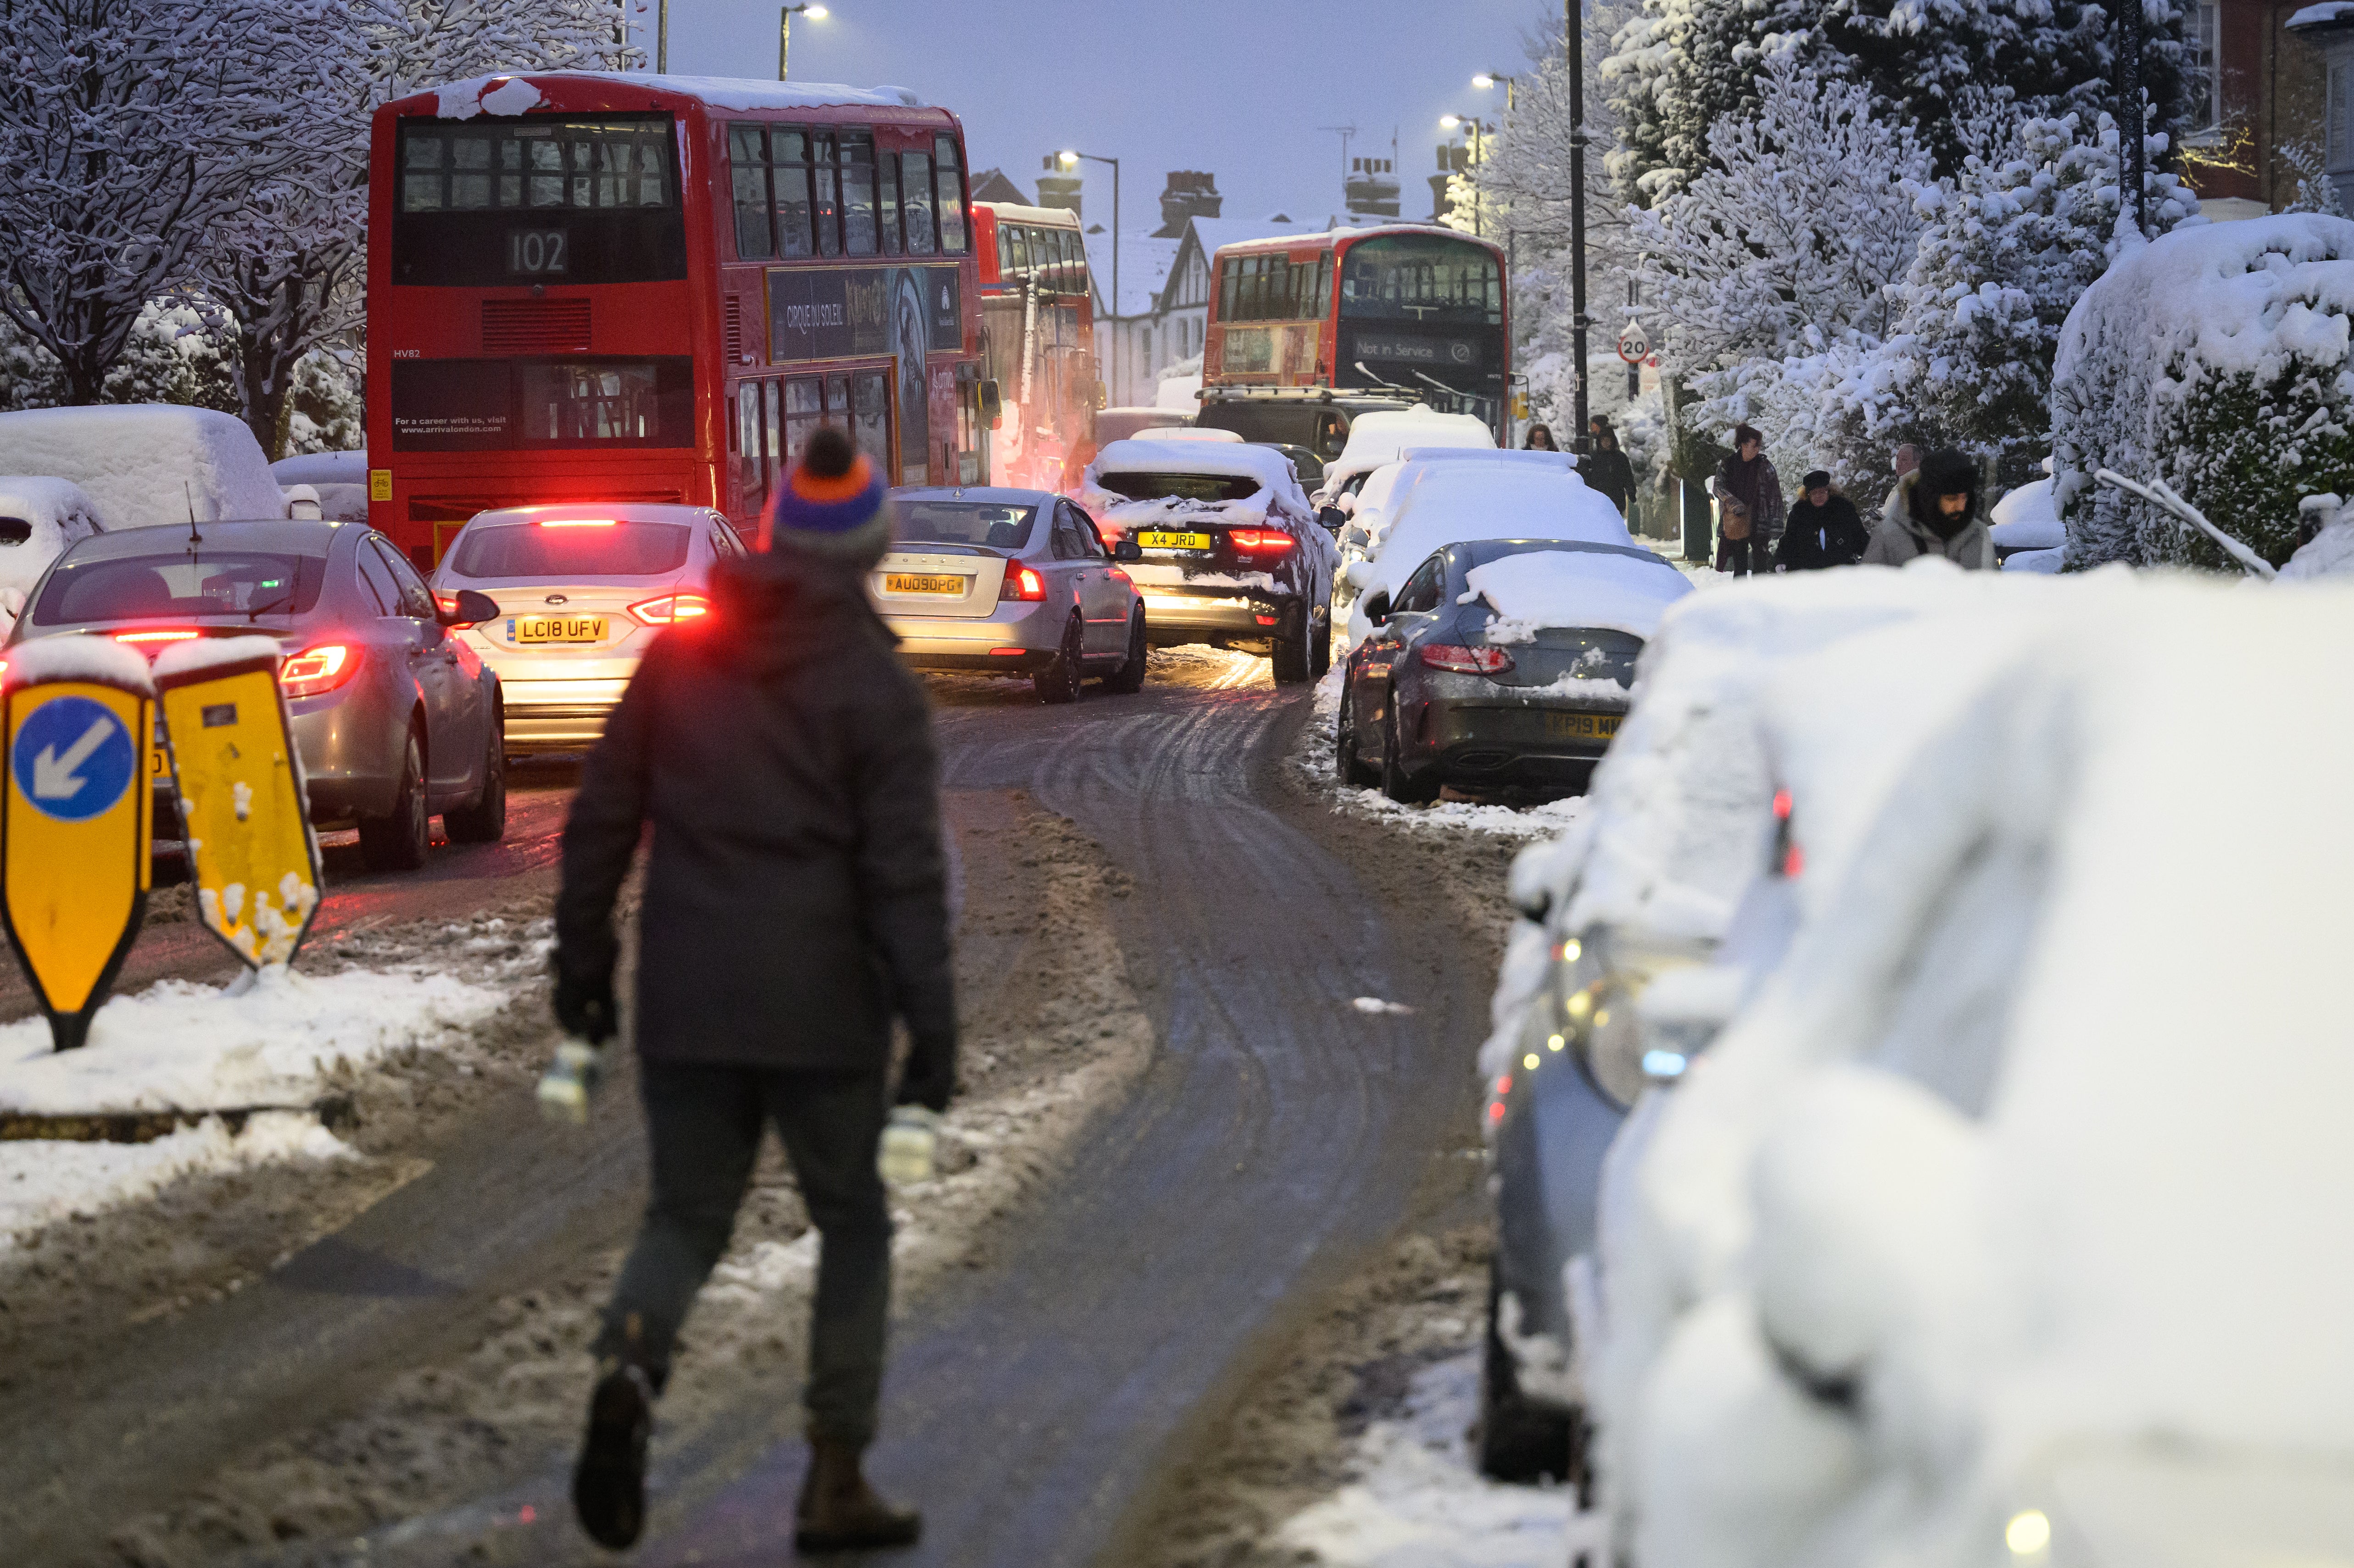 A man walks along an icy road as cars wind around abandoned buses on Monday